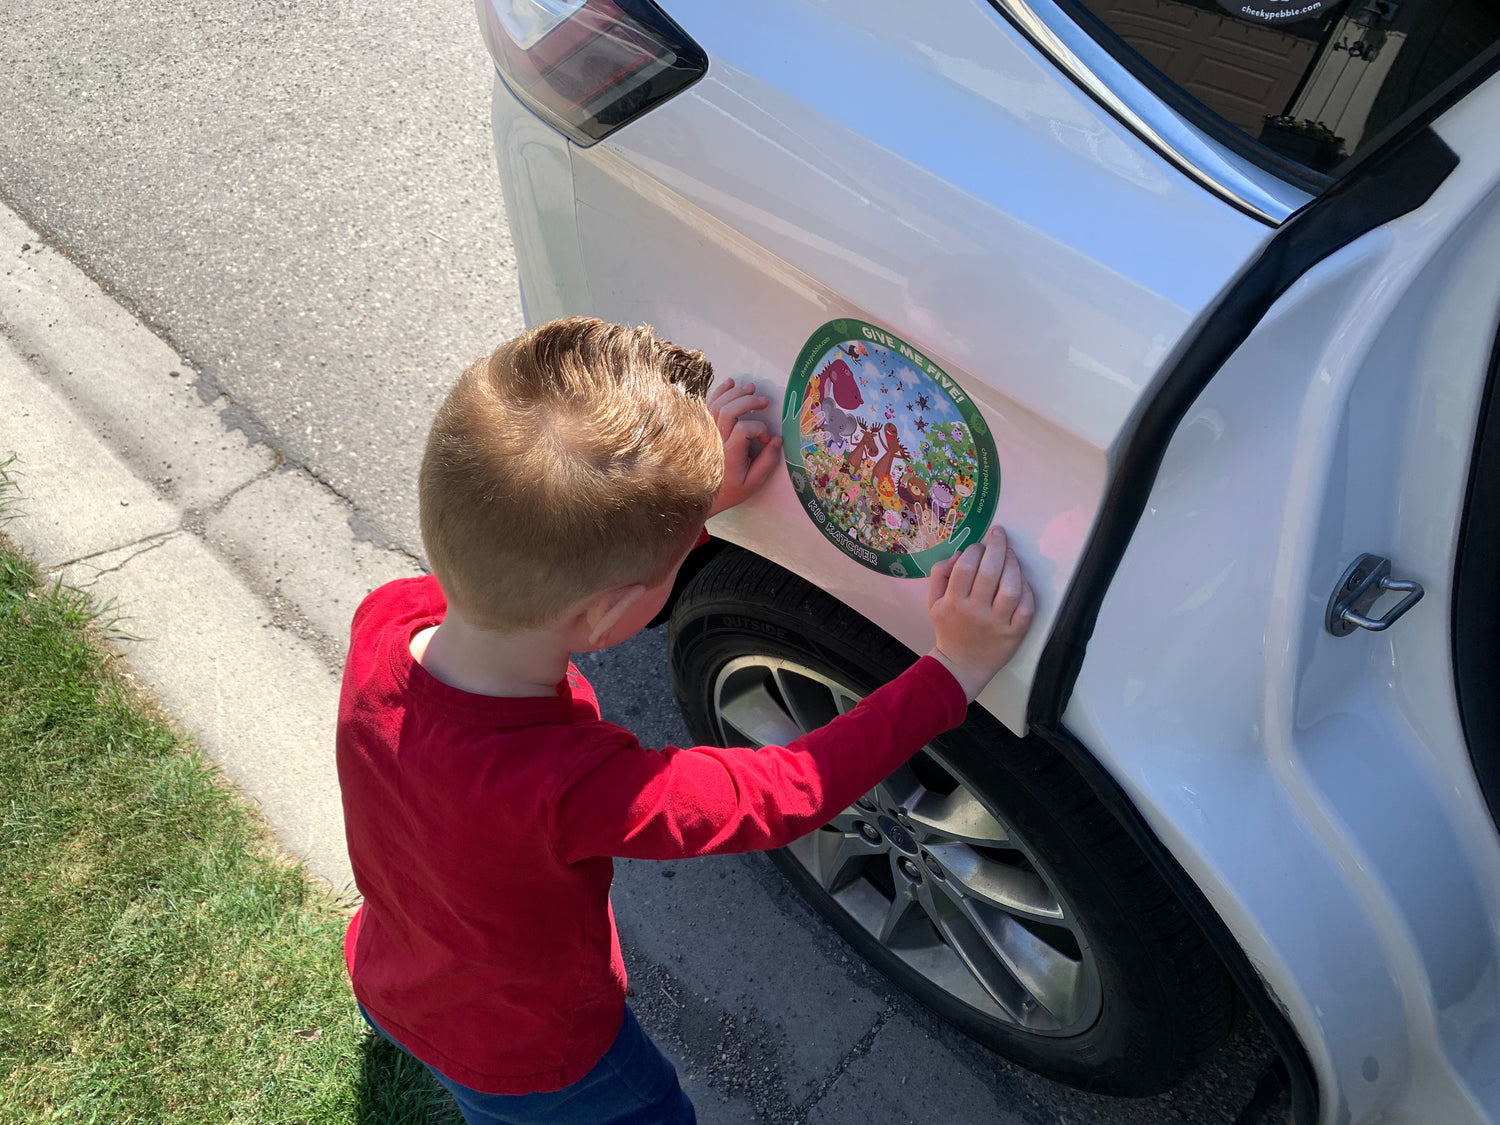 Image of a child searching the animal Kid Katcher toddler magnet that is placed on a vehicle in the recommended Safe Zone.